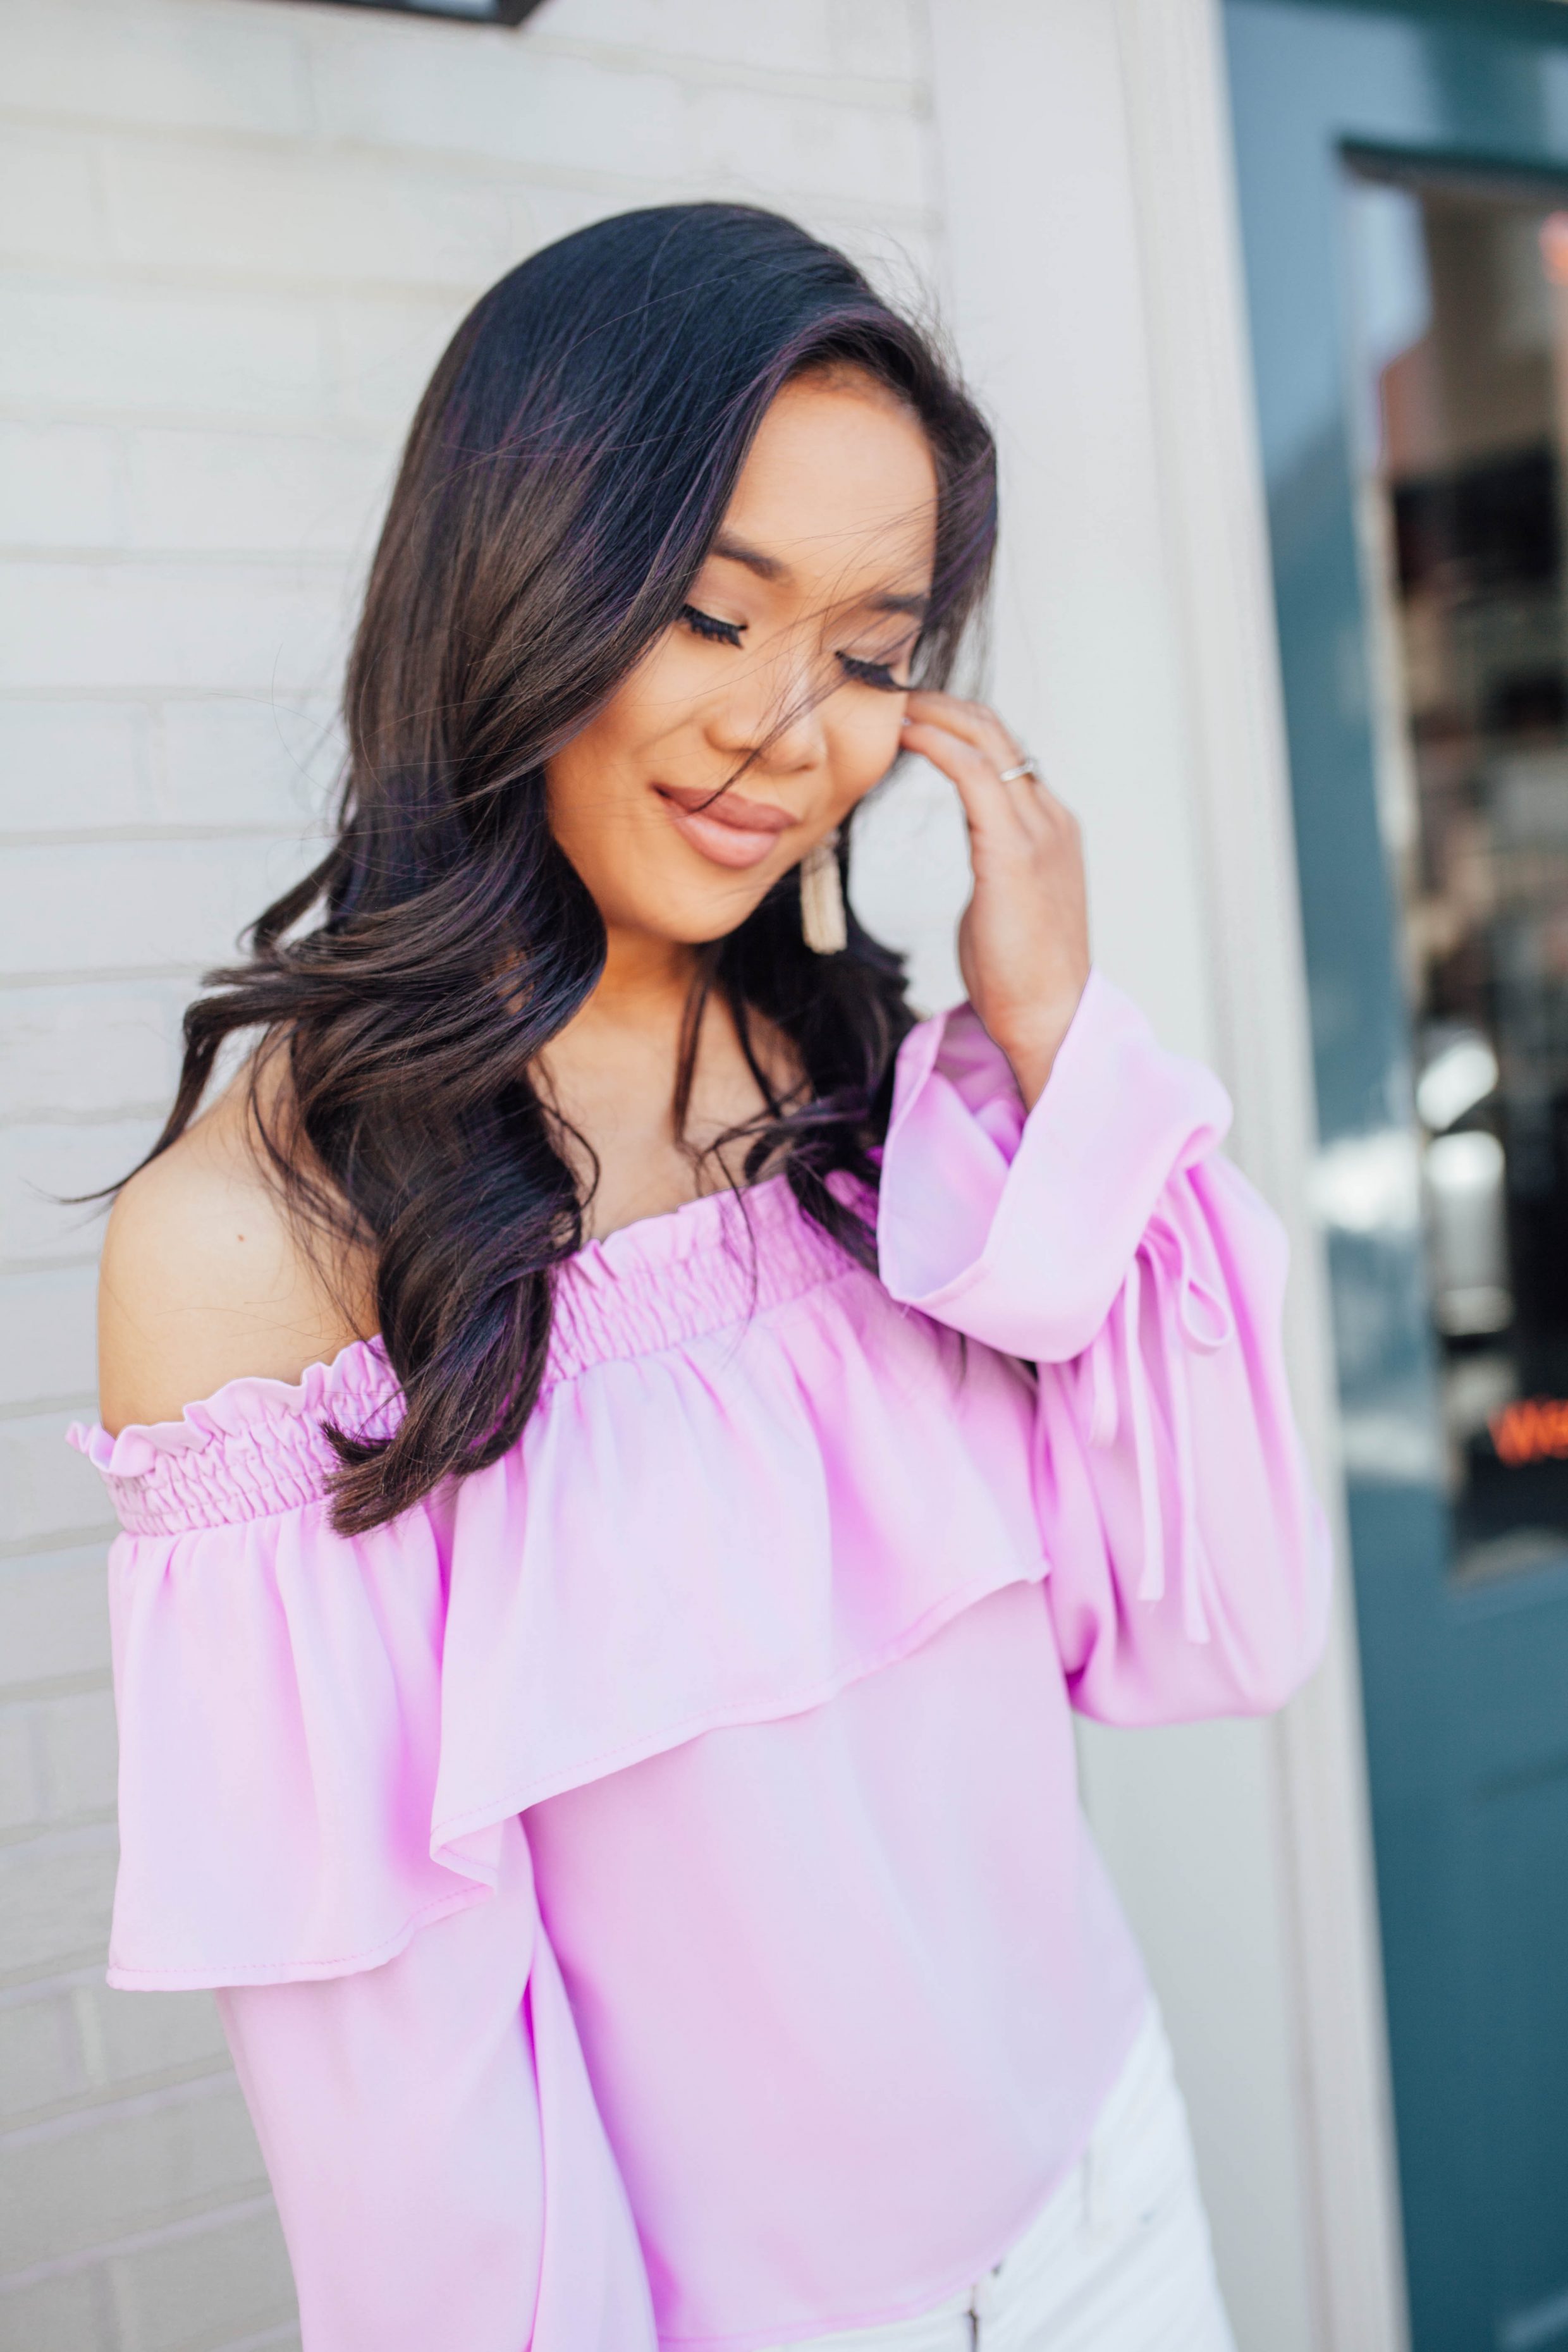 Hoang-Kim wears a lavender off-the-shoulder top with white tassel earrings